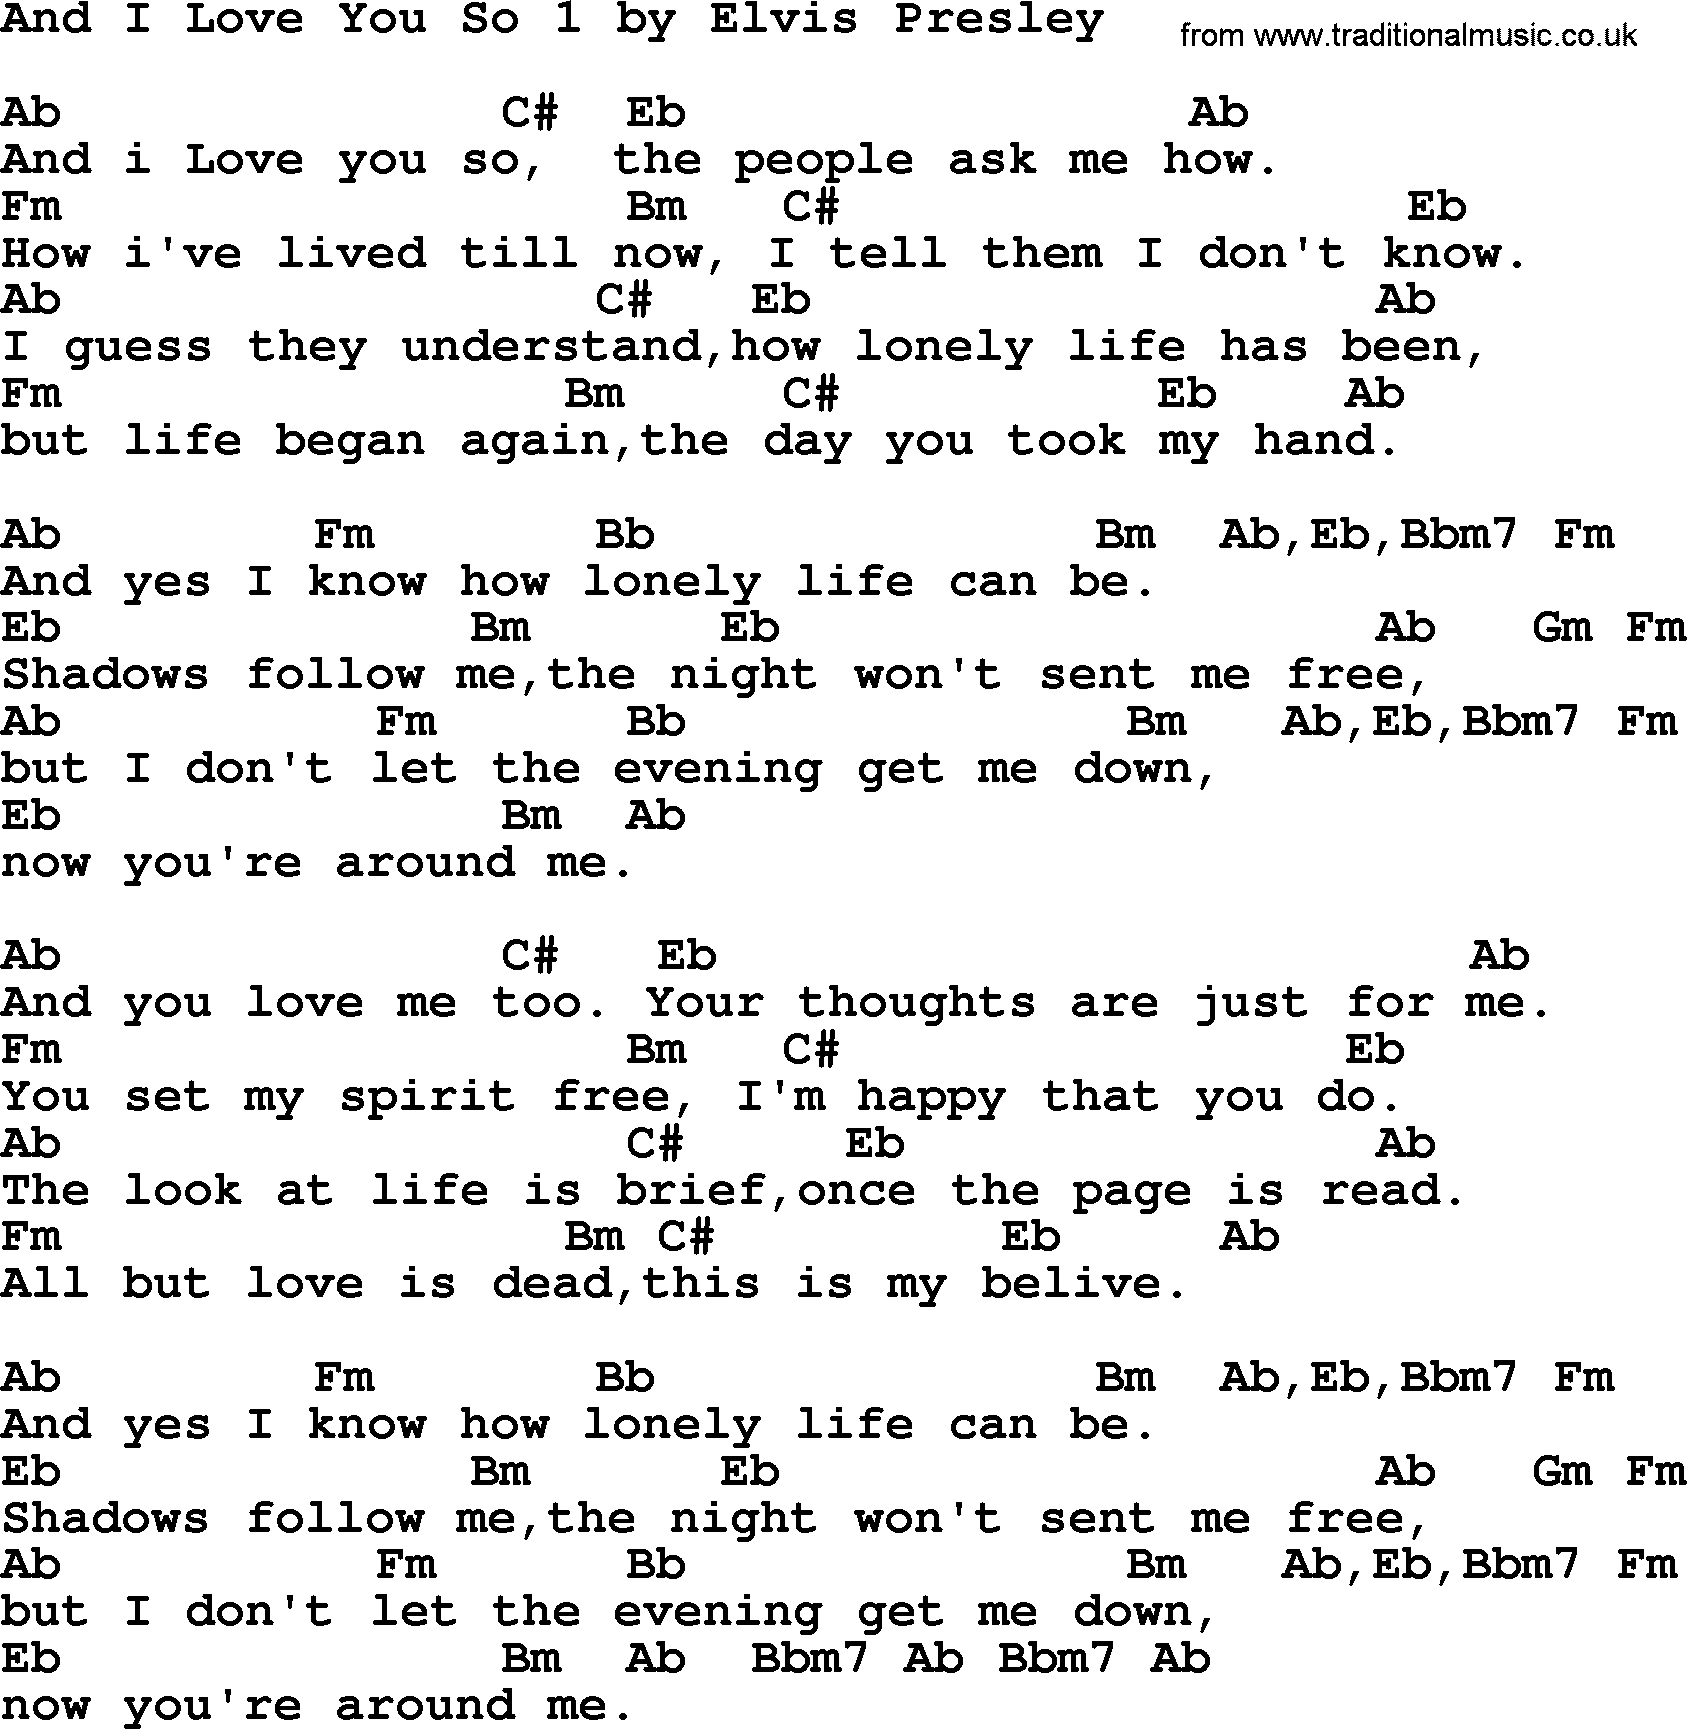 Elvis Presley song: And I Love You So 1, lyrics and chords